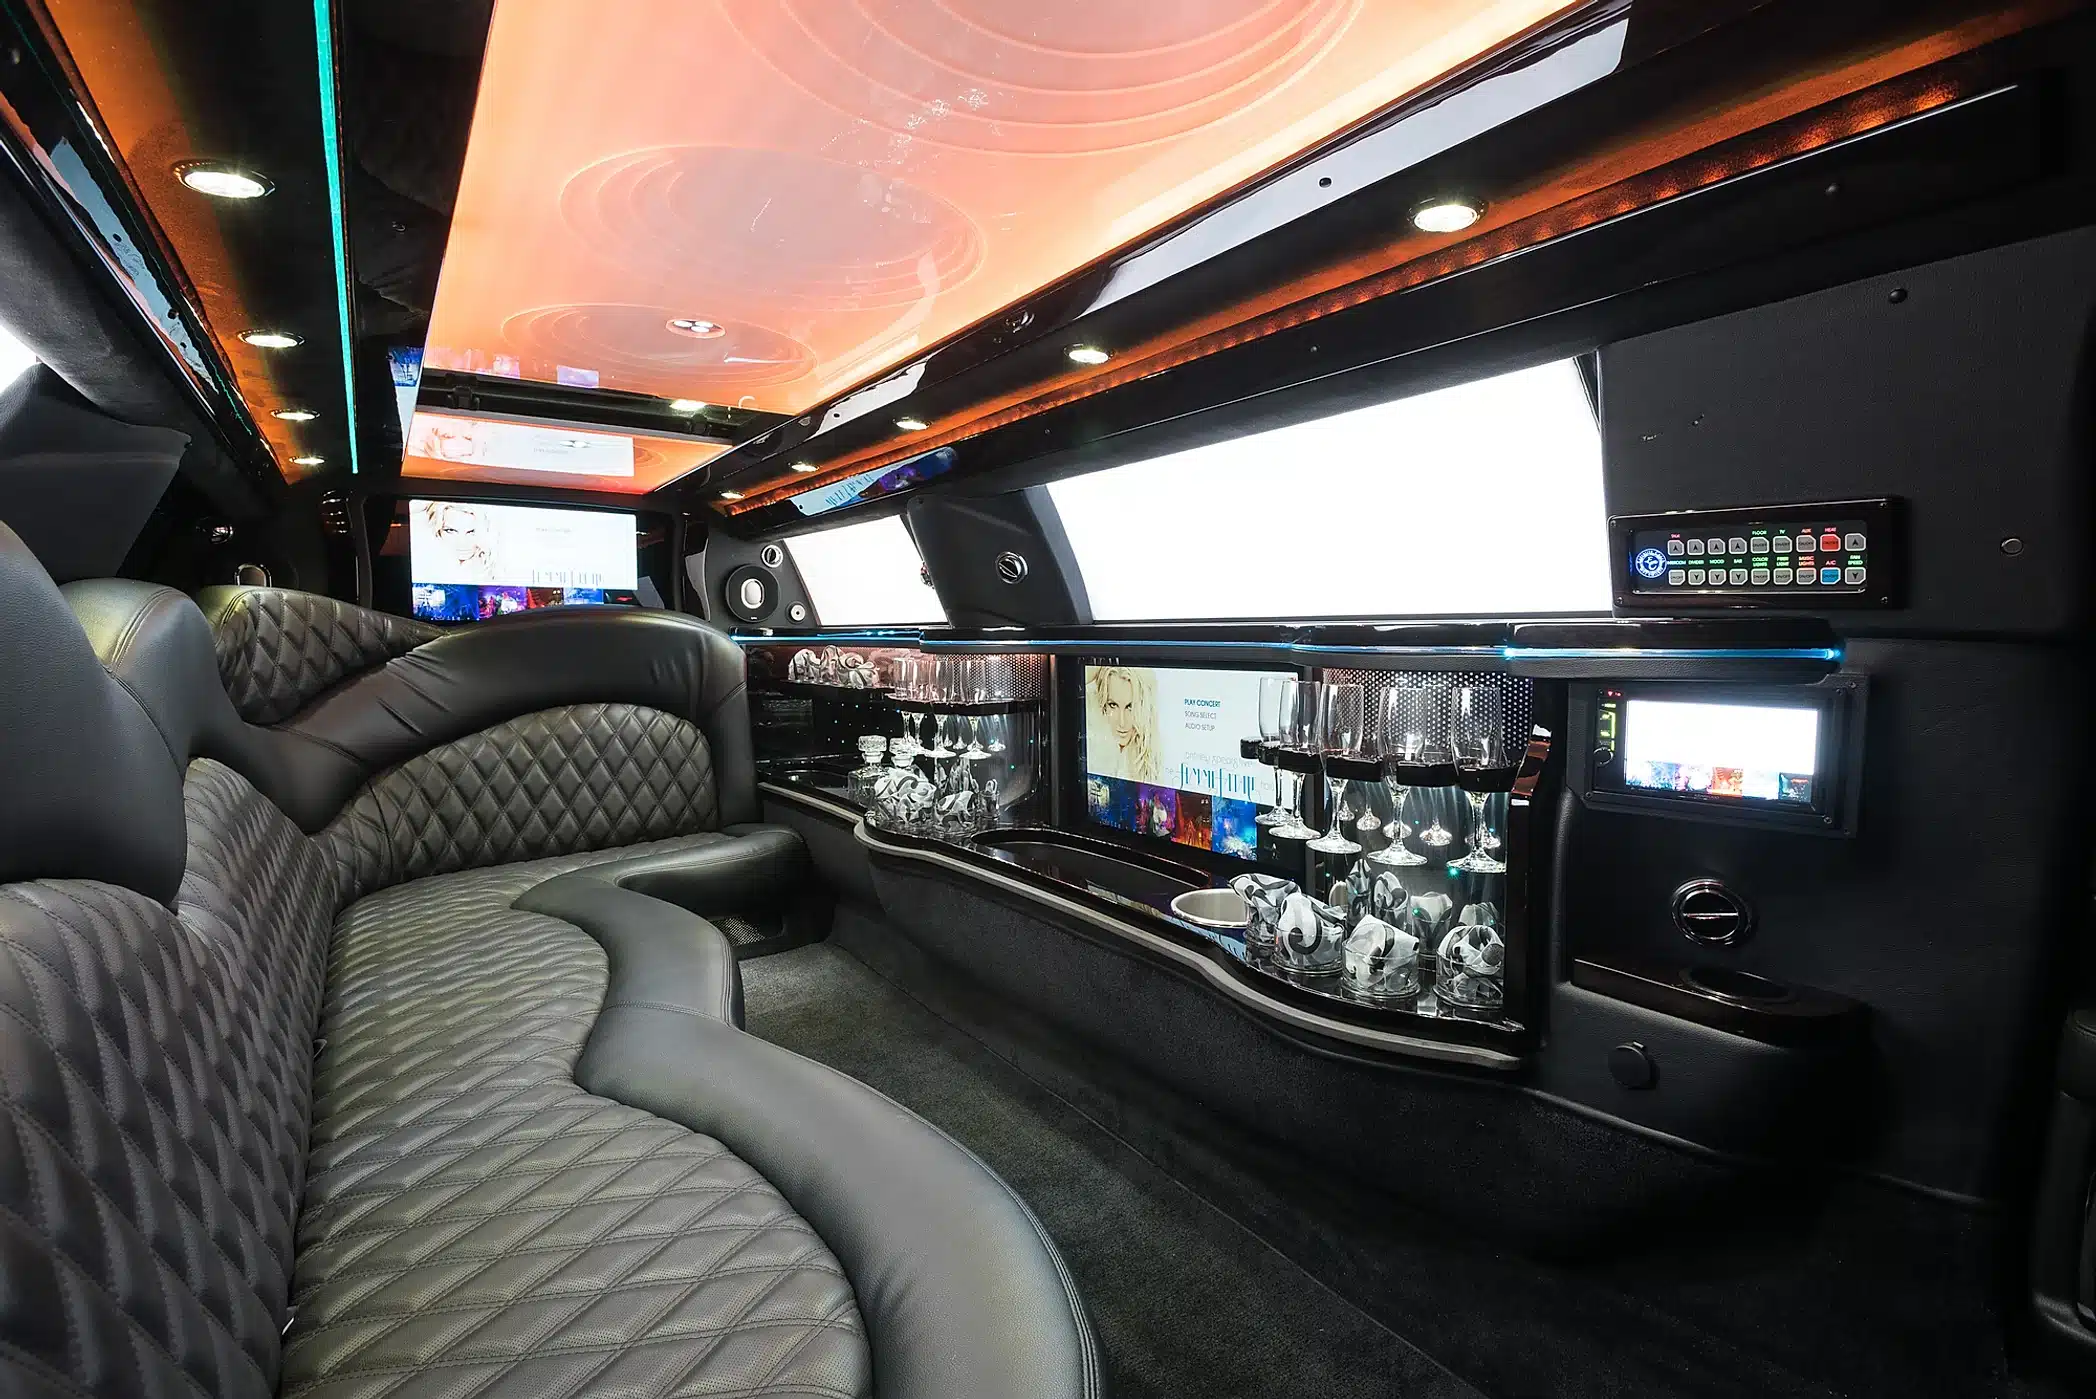 Enjoy Luxurious Limo Service from Thousand Oaks to LAX